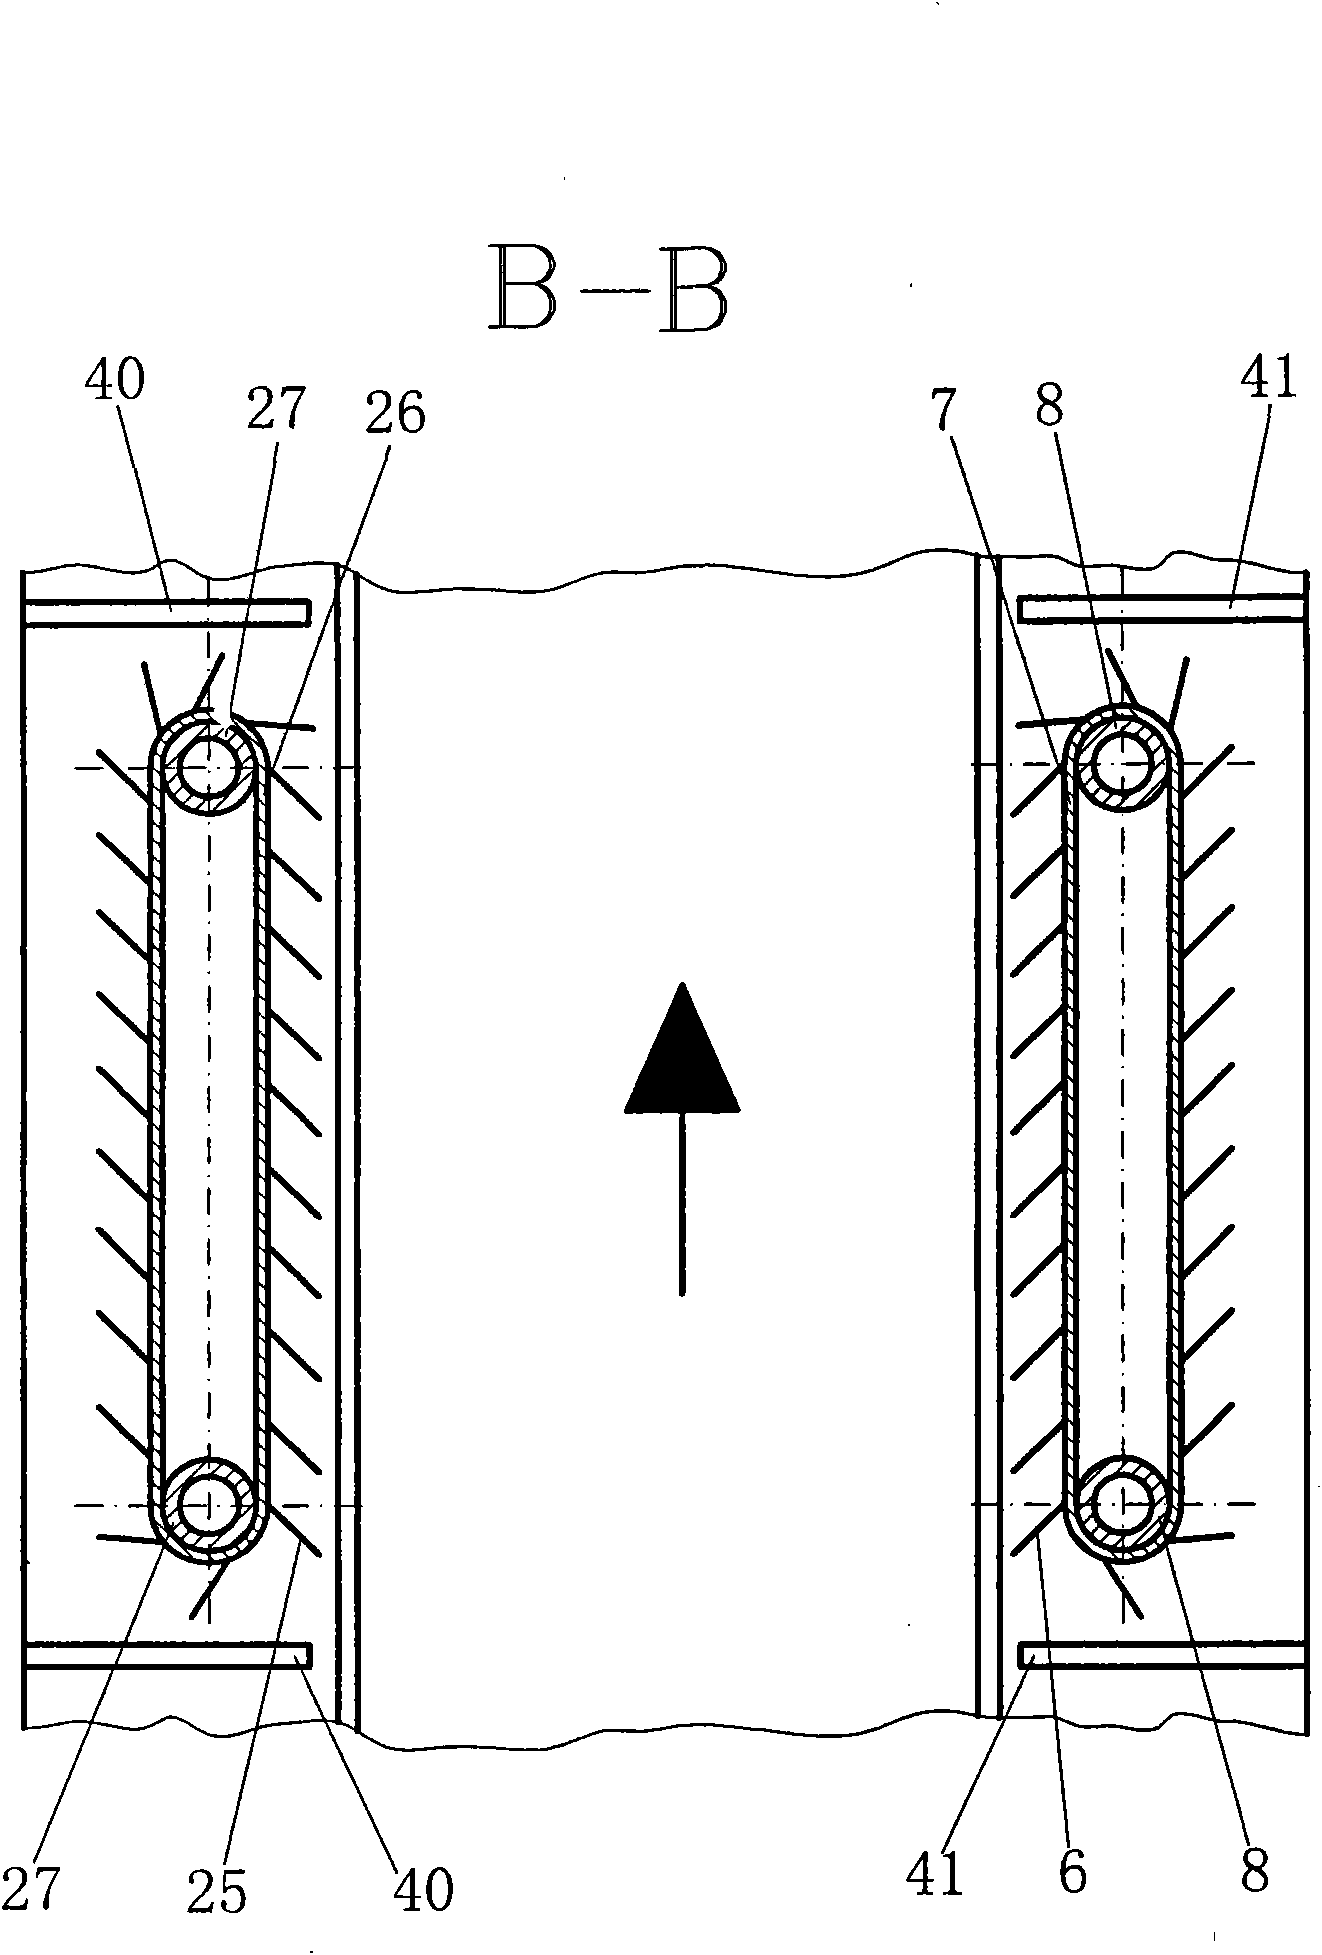 Tunnel wind-driven generating device